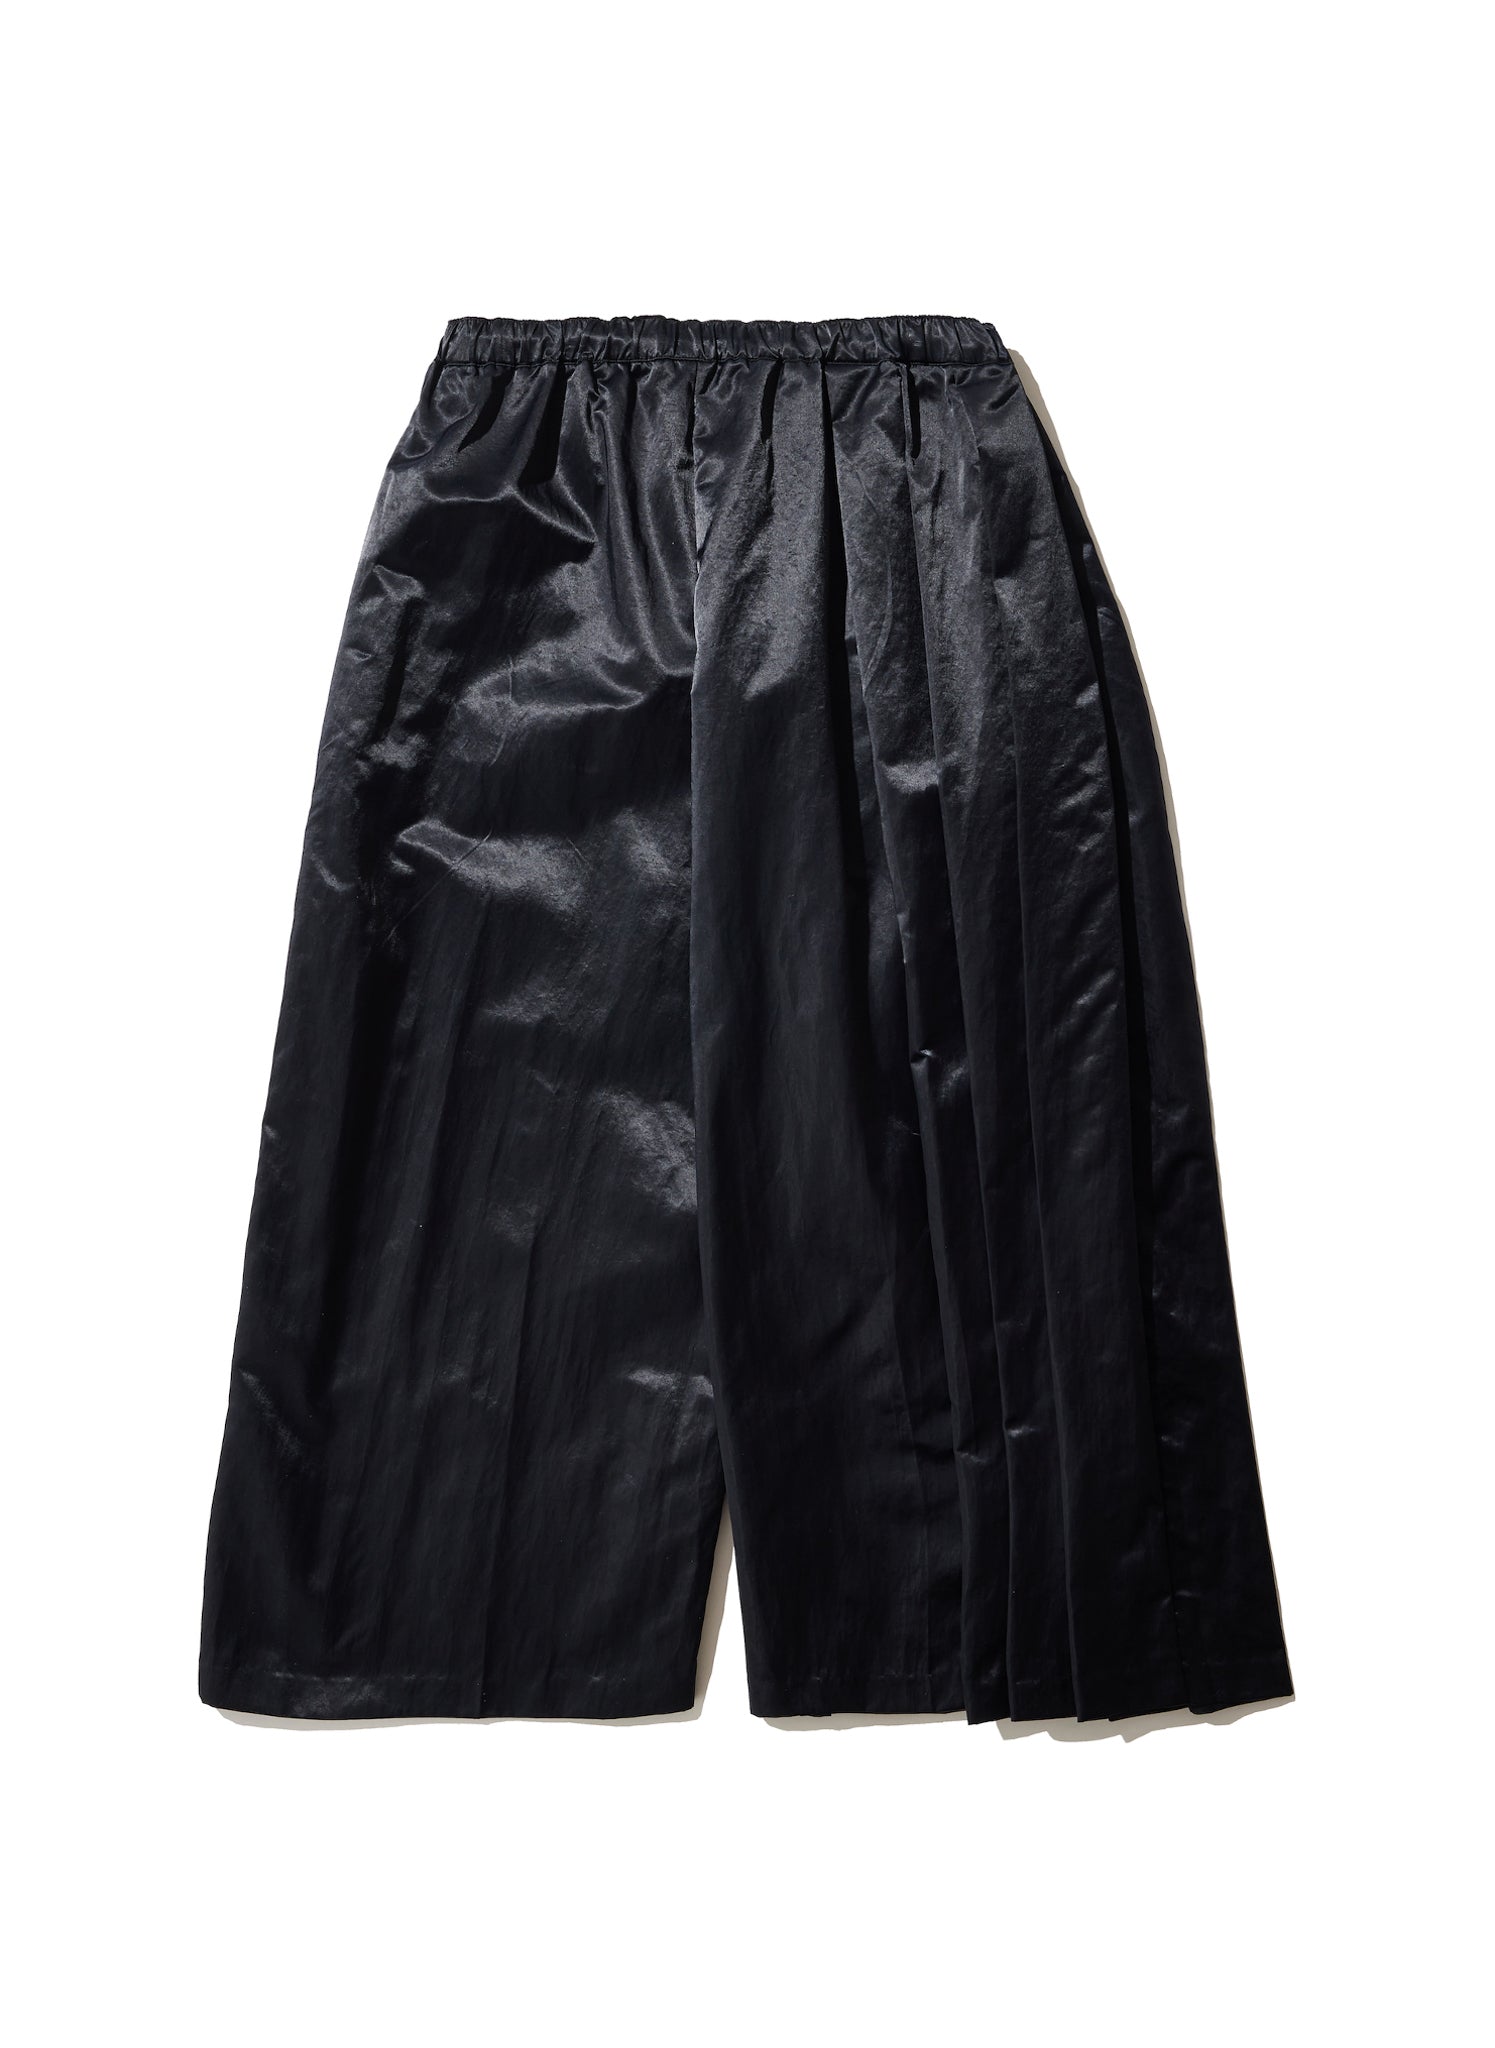 WILLY CHAVARRIA / SCHOOLBOY PANTS BLACK